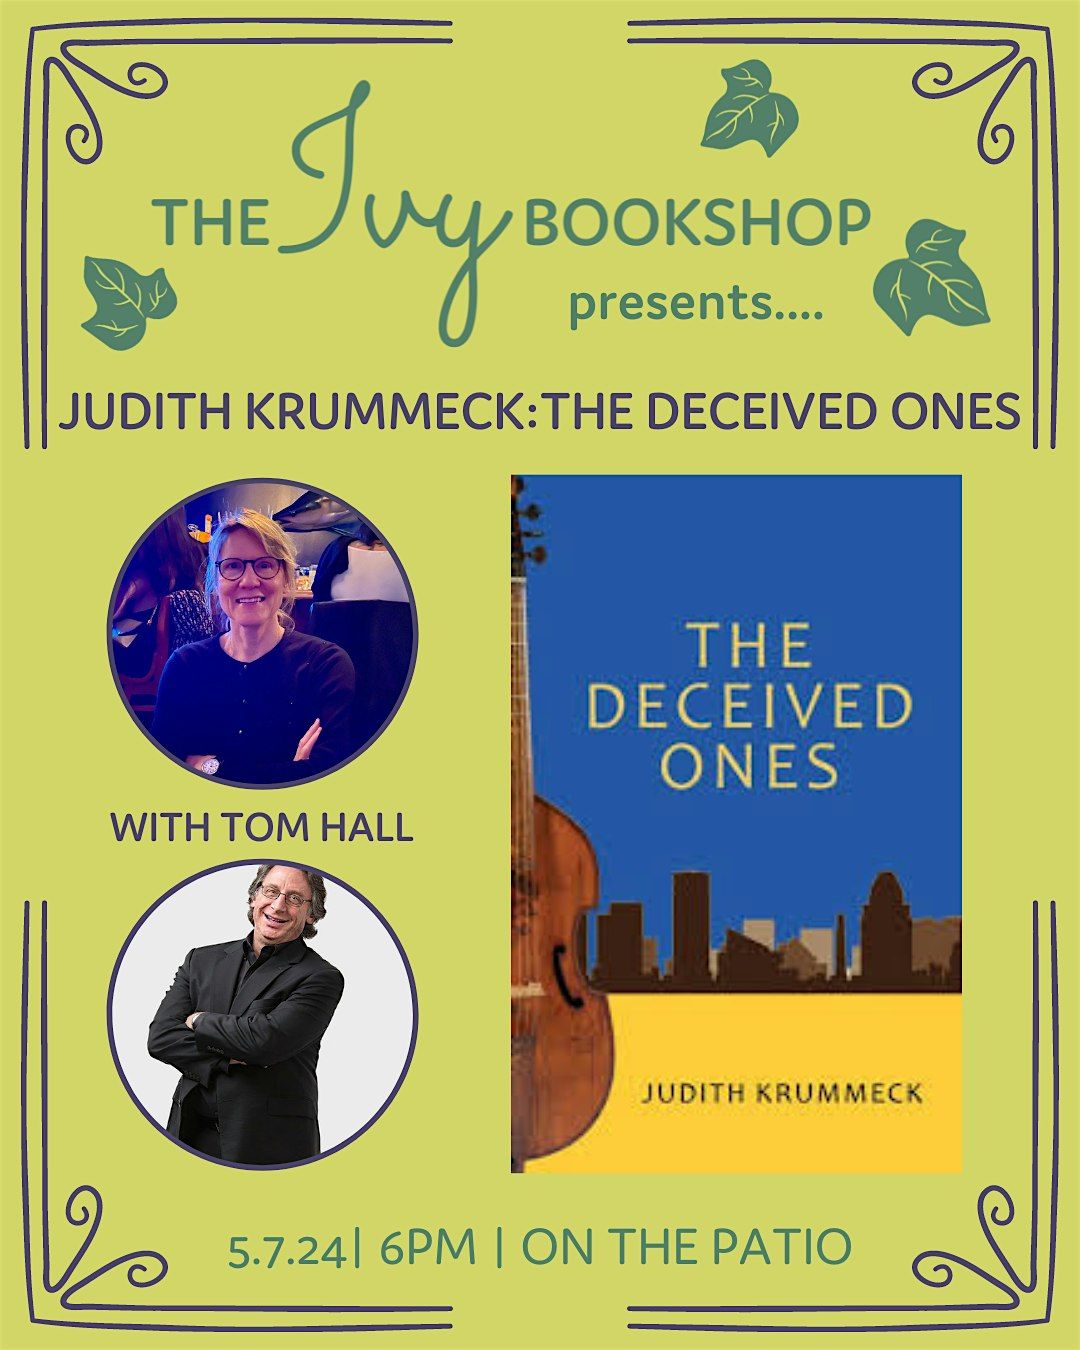 Judith Krummeck: Book Launch for THE DECEIVED ONES (with Tom Hall)